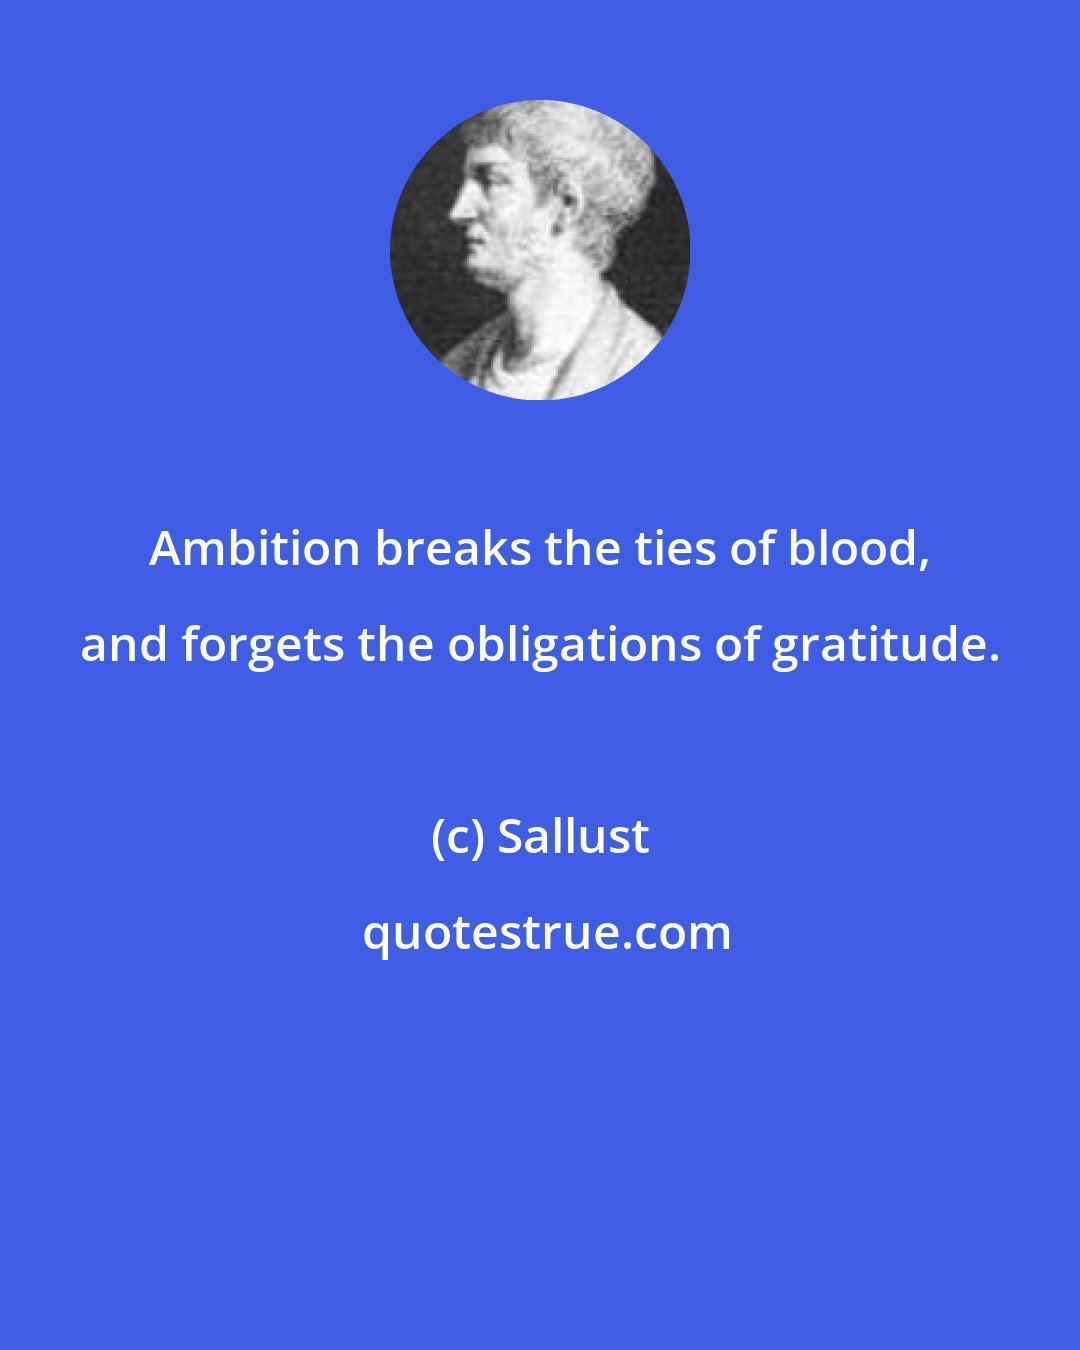 Sallust: Ambition breaks the ties of blood, and forgets the obligations of gratitude.